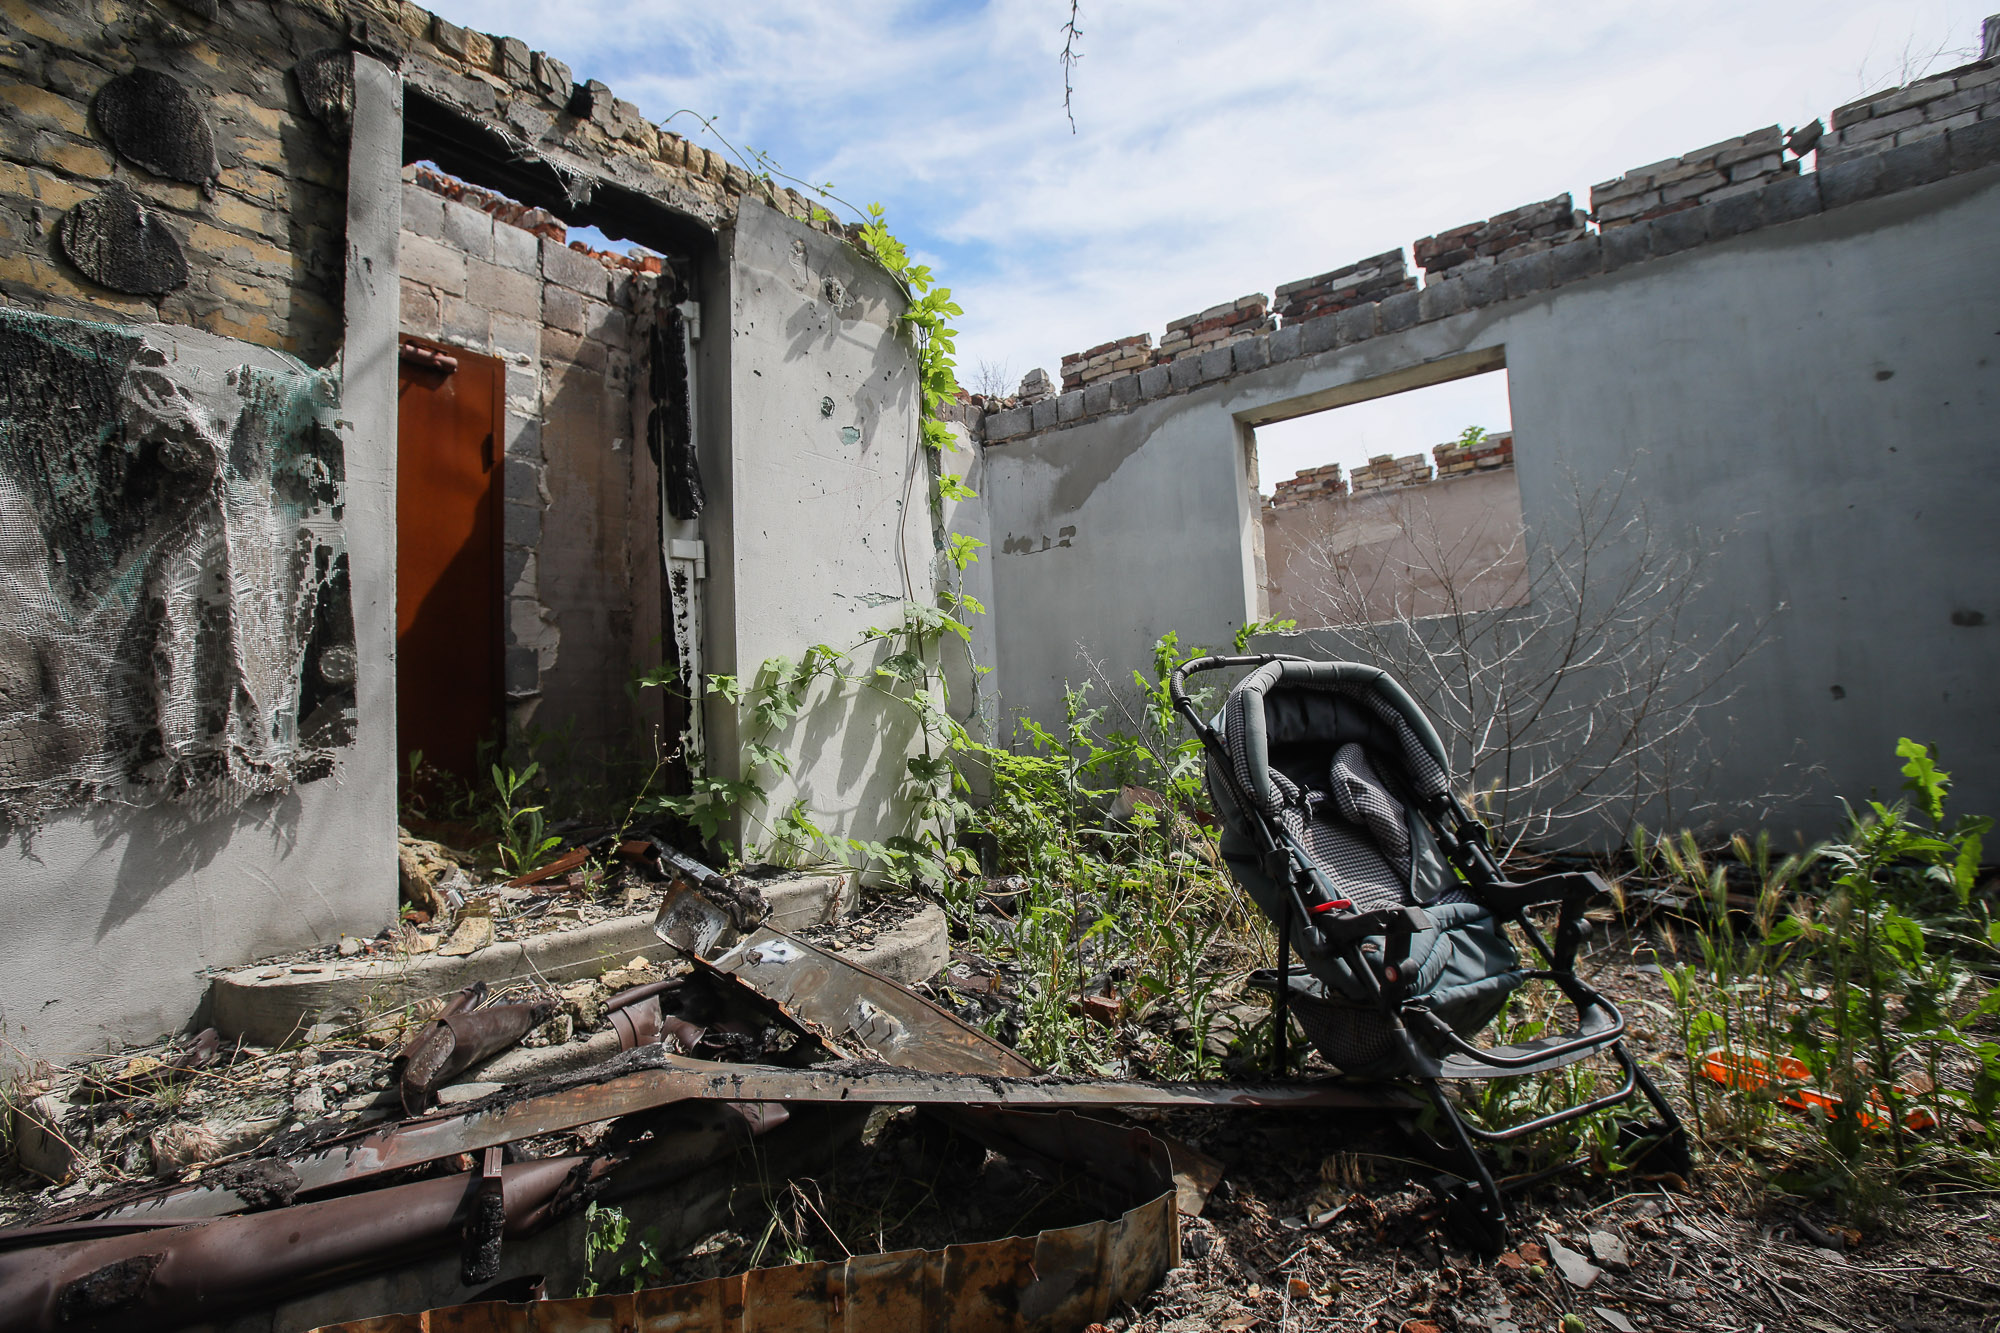 A baby trolley abandoned near a ruined house, pictured in the town of Opytne, eastern Ukraine, on June 12, 2019.